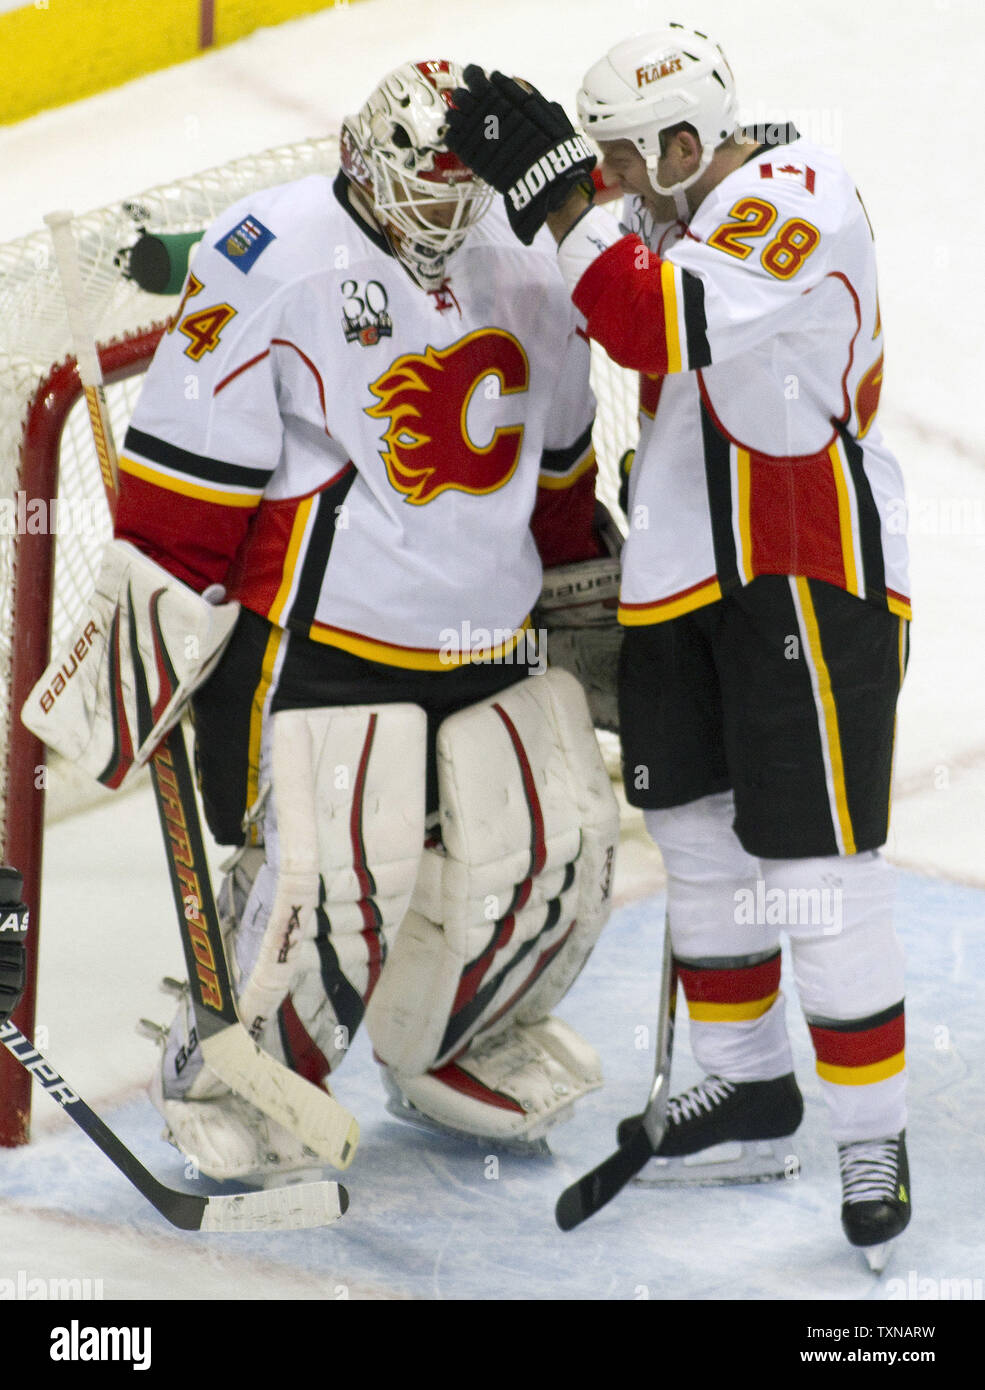 Franchise best? Miikka Kiprusoff shoots for Flames all-time win record -  NBC Sports